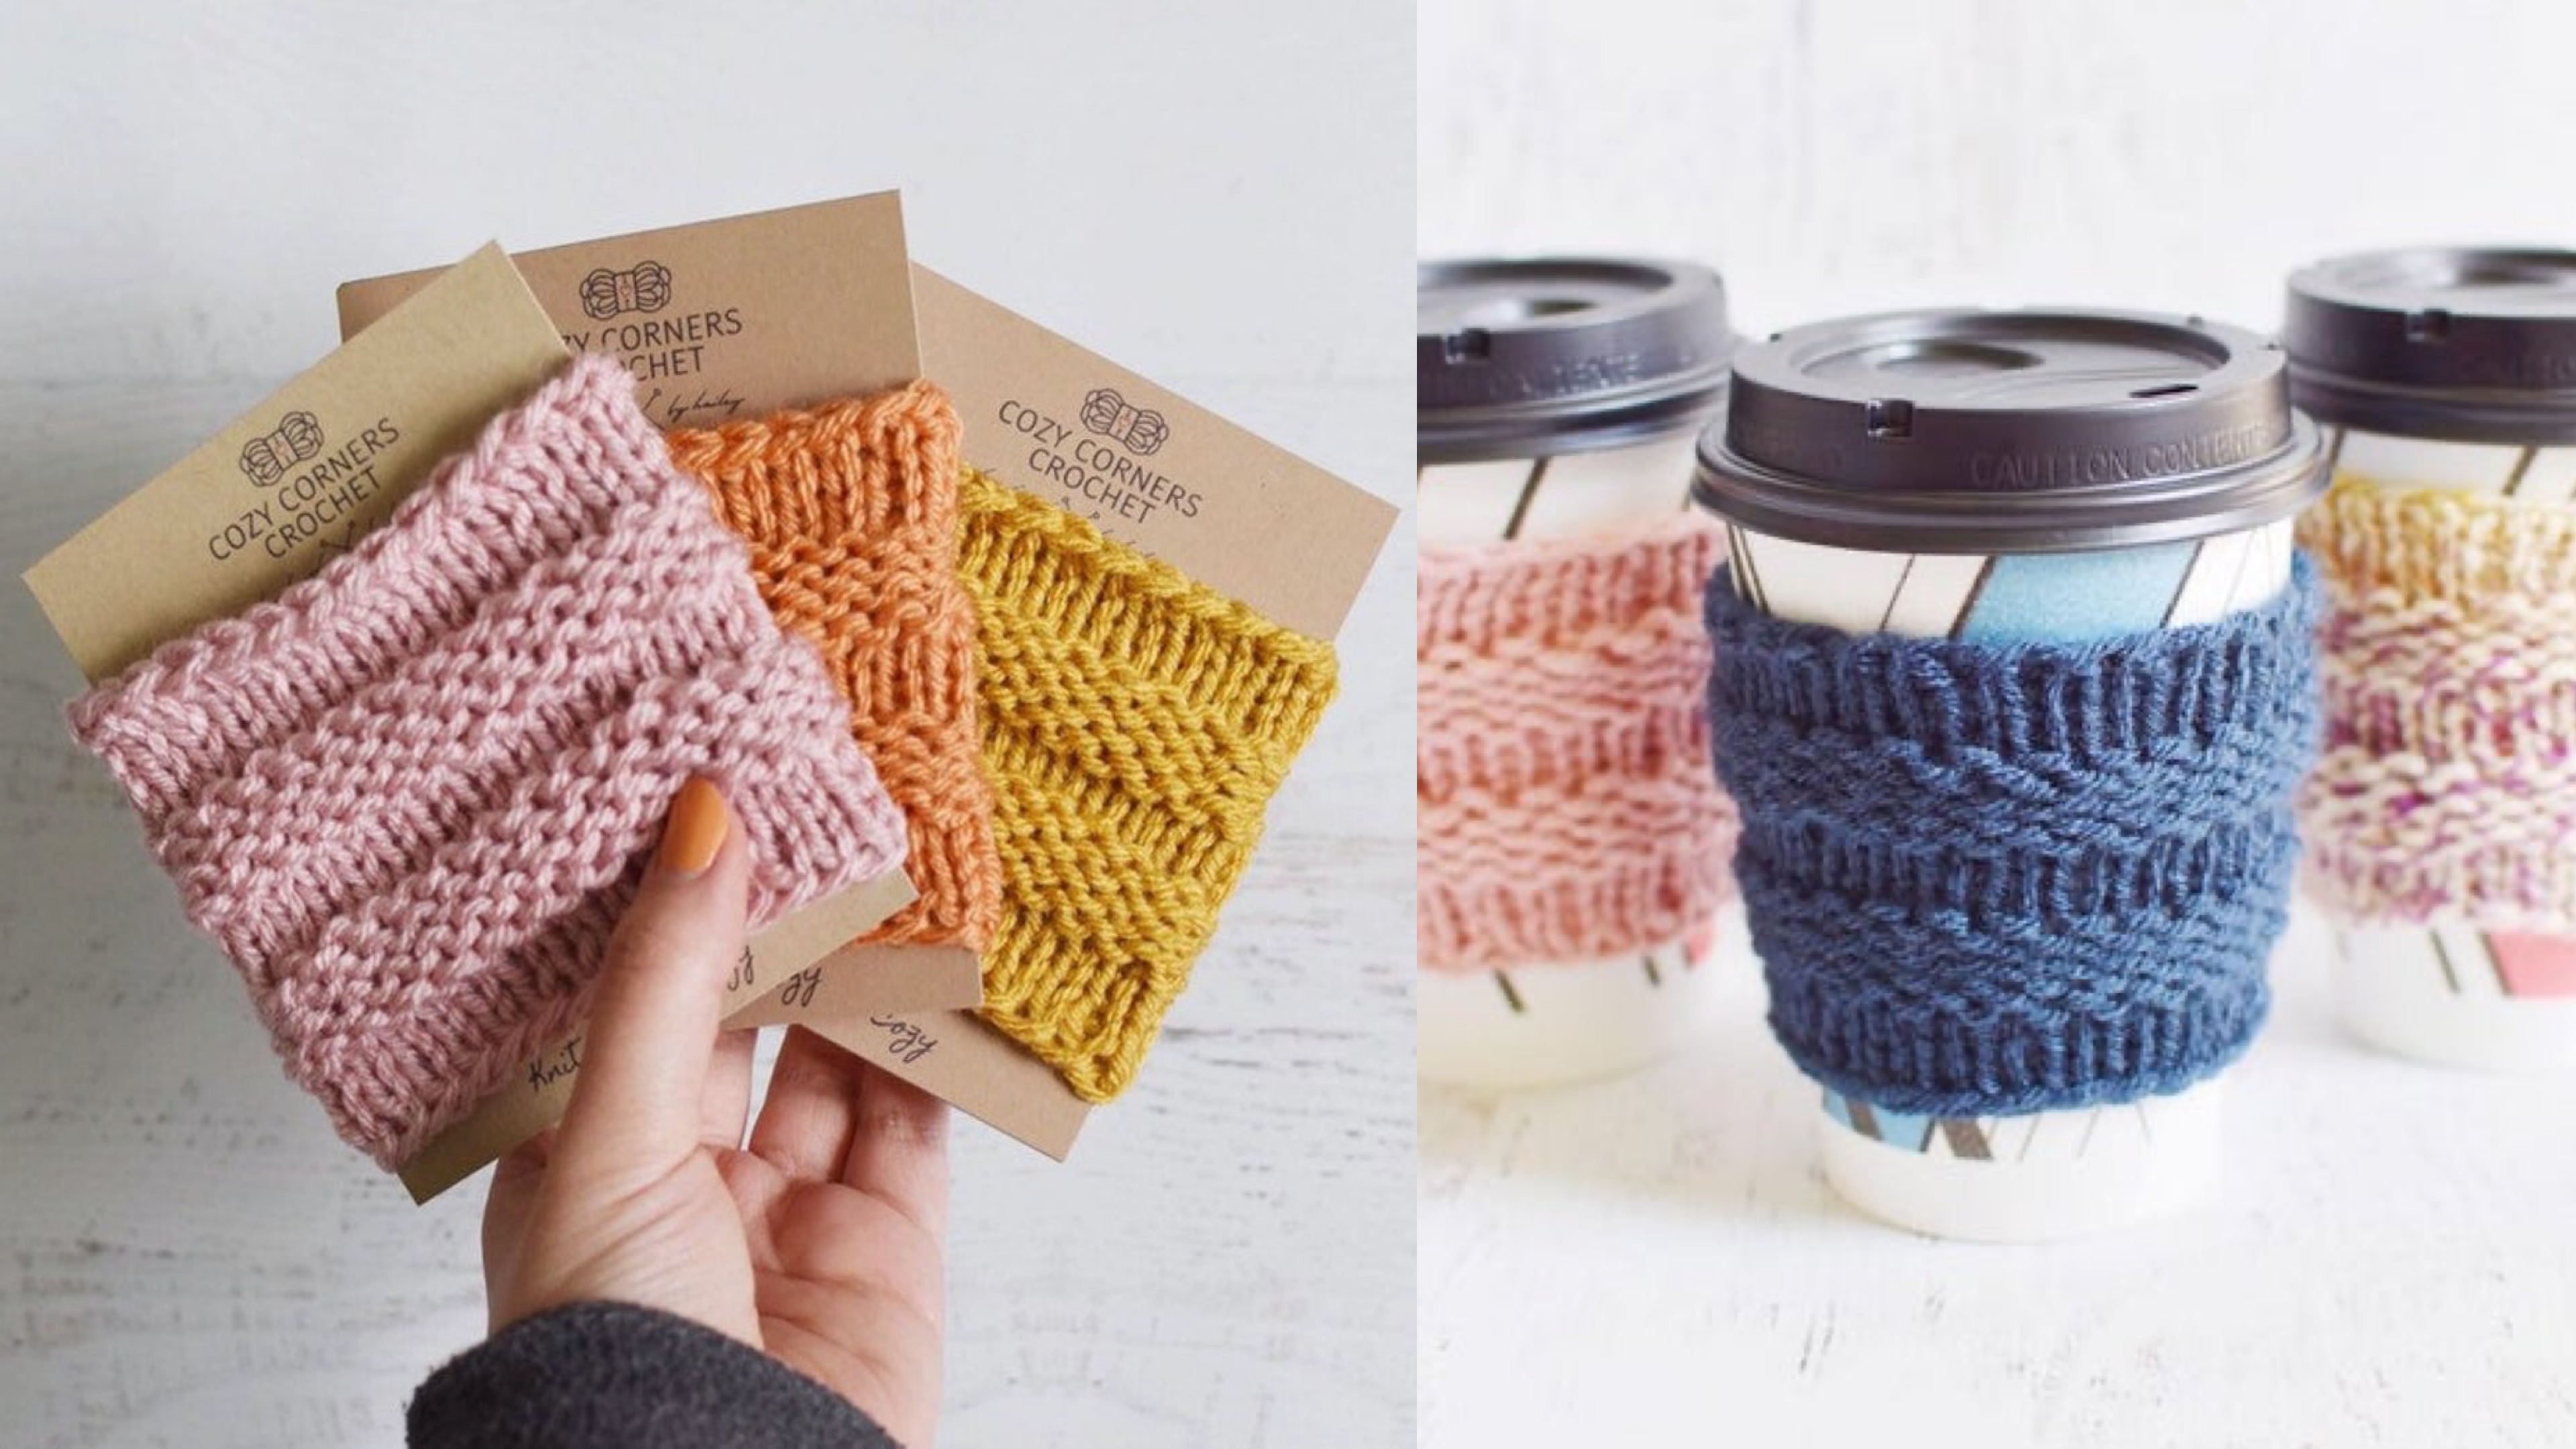 coffee cozy so your hand doesn't burn holding the cup